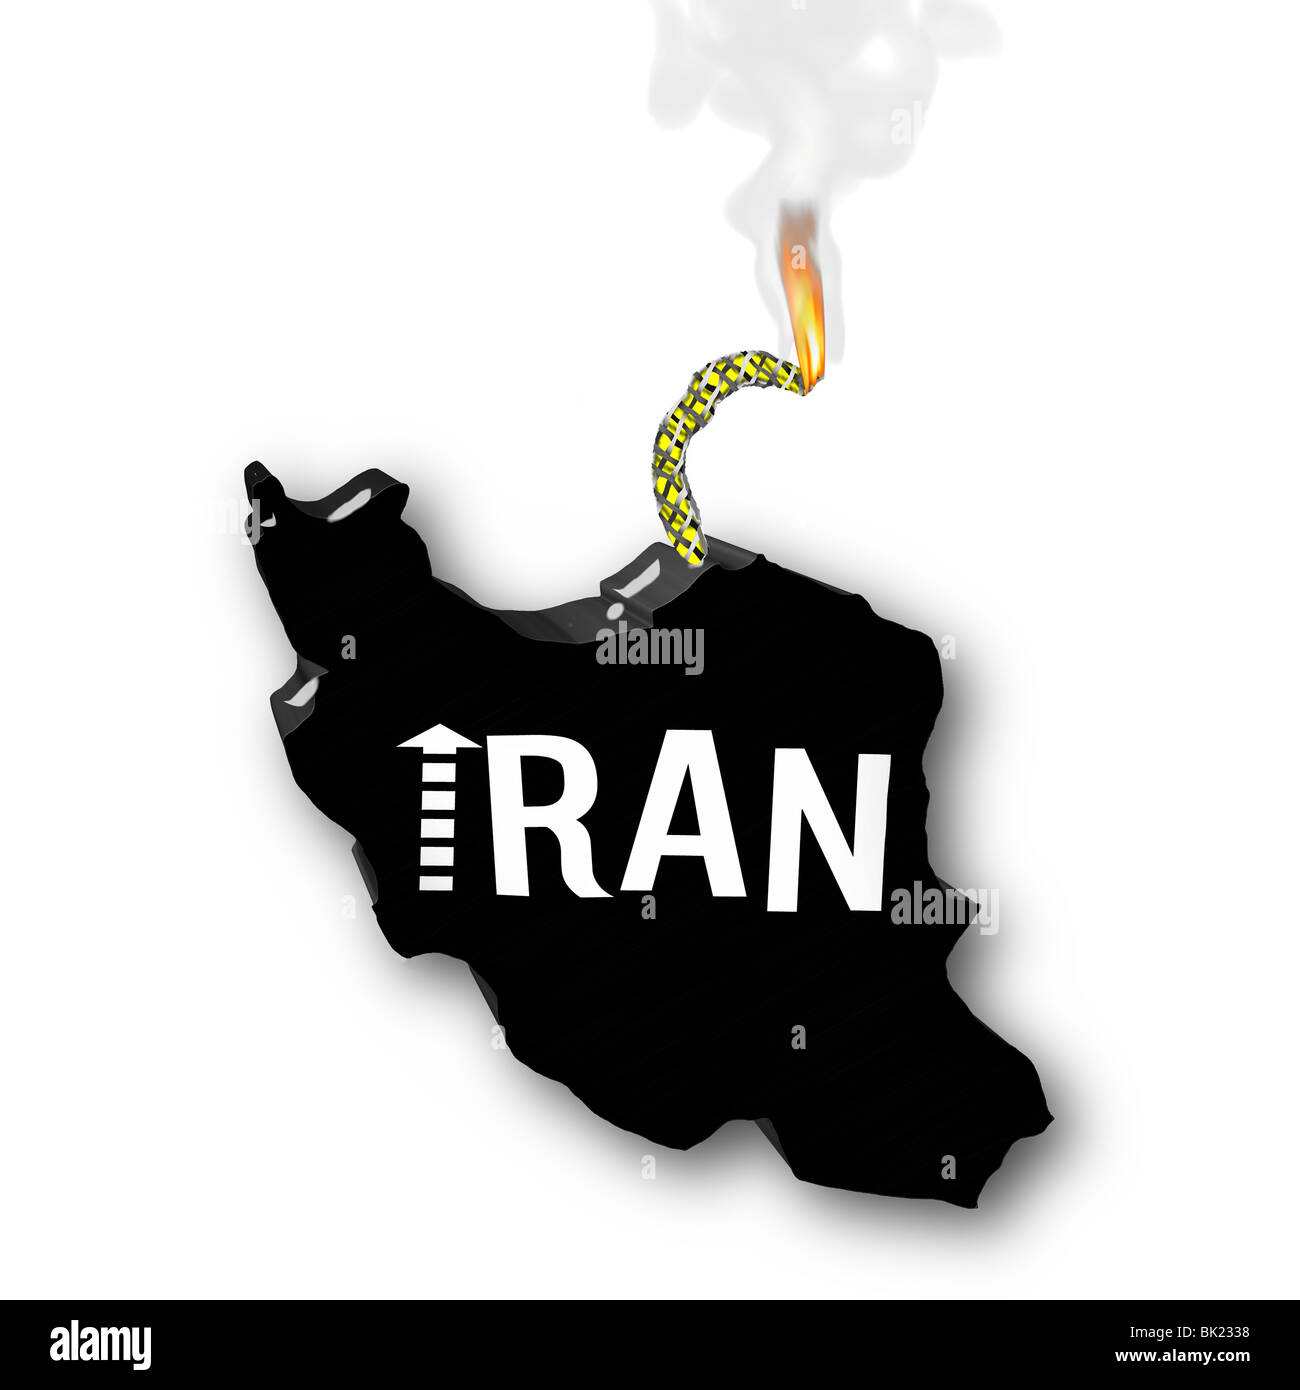 The time bomb that is Iran - A bomb in the shape of Iran with a lit fuse Stock Photo